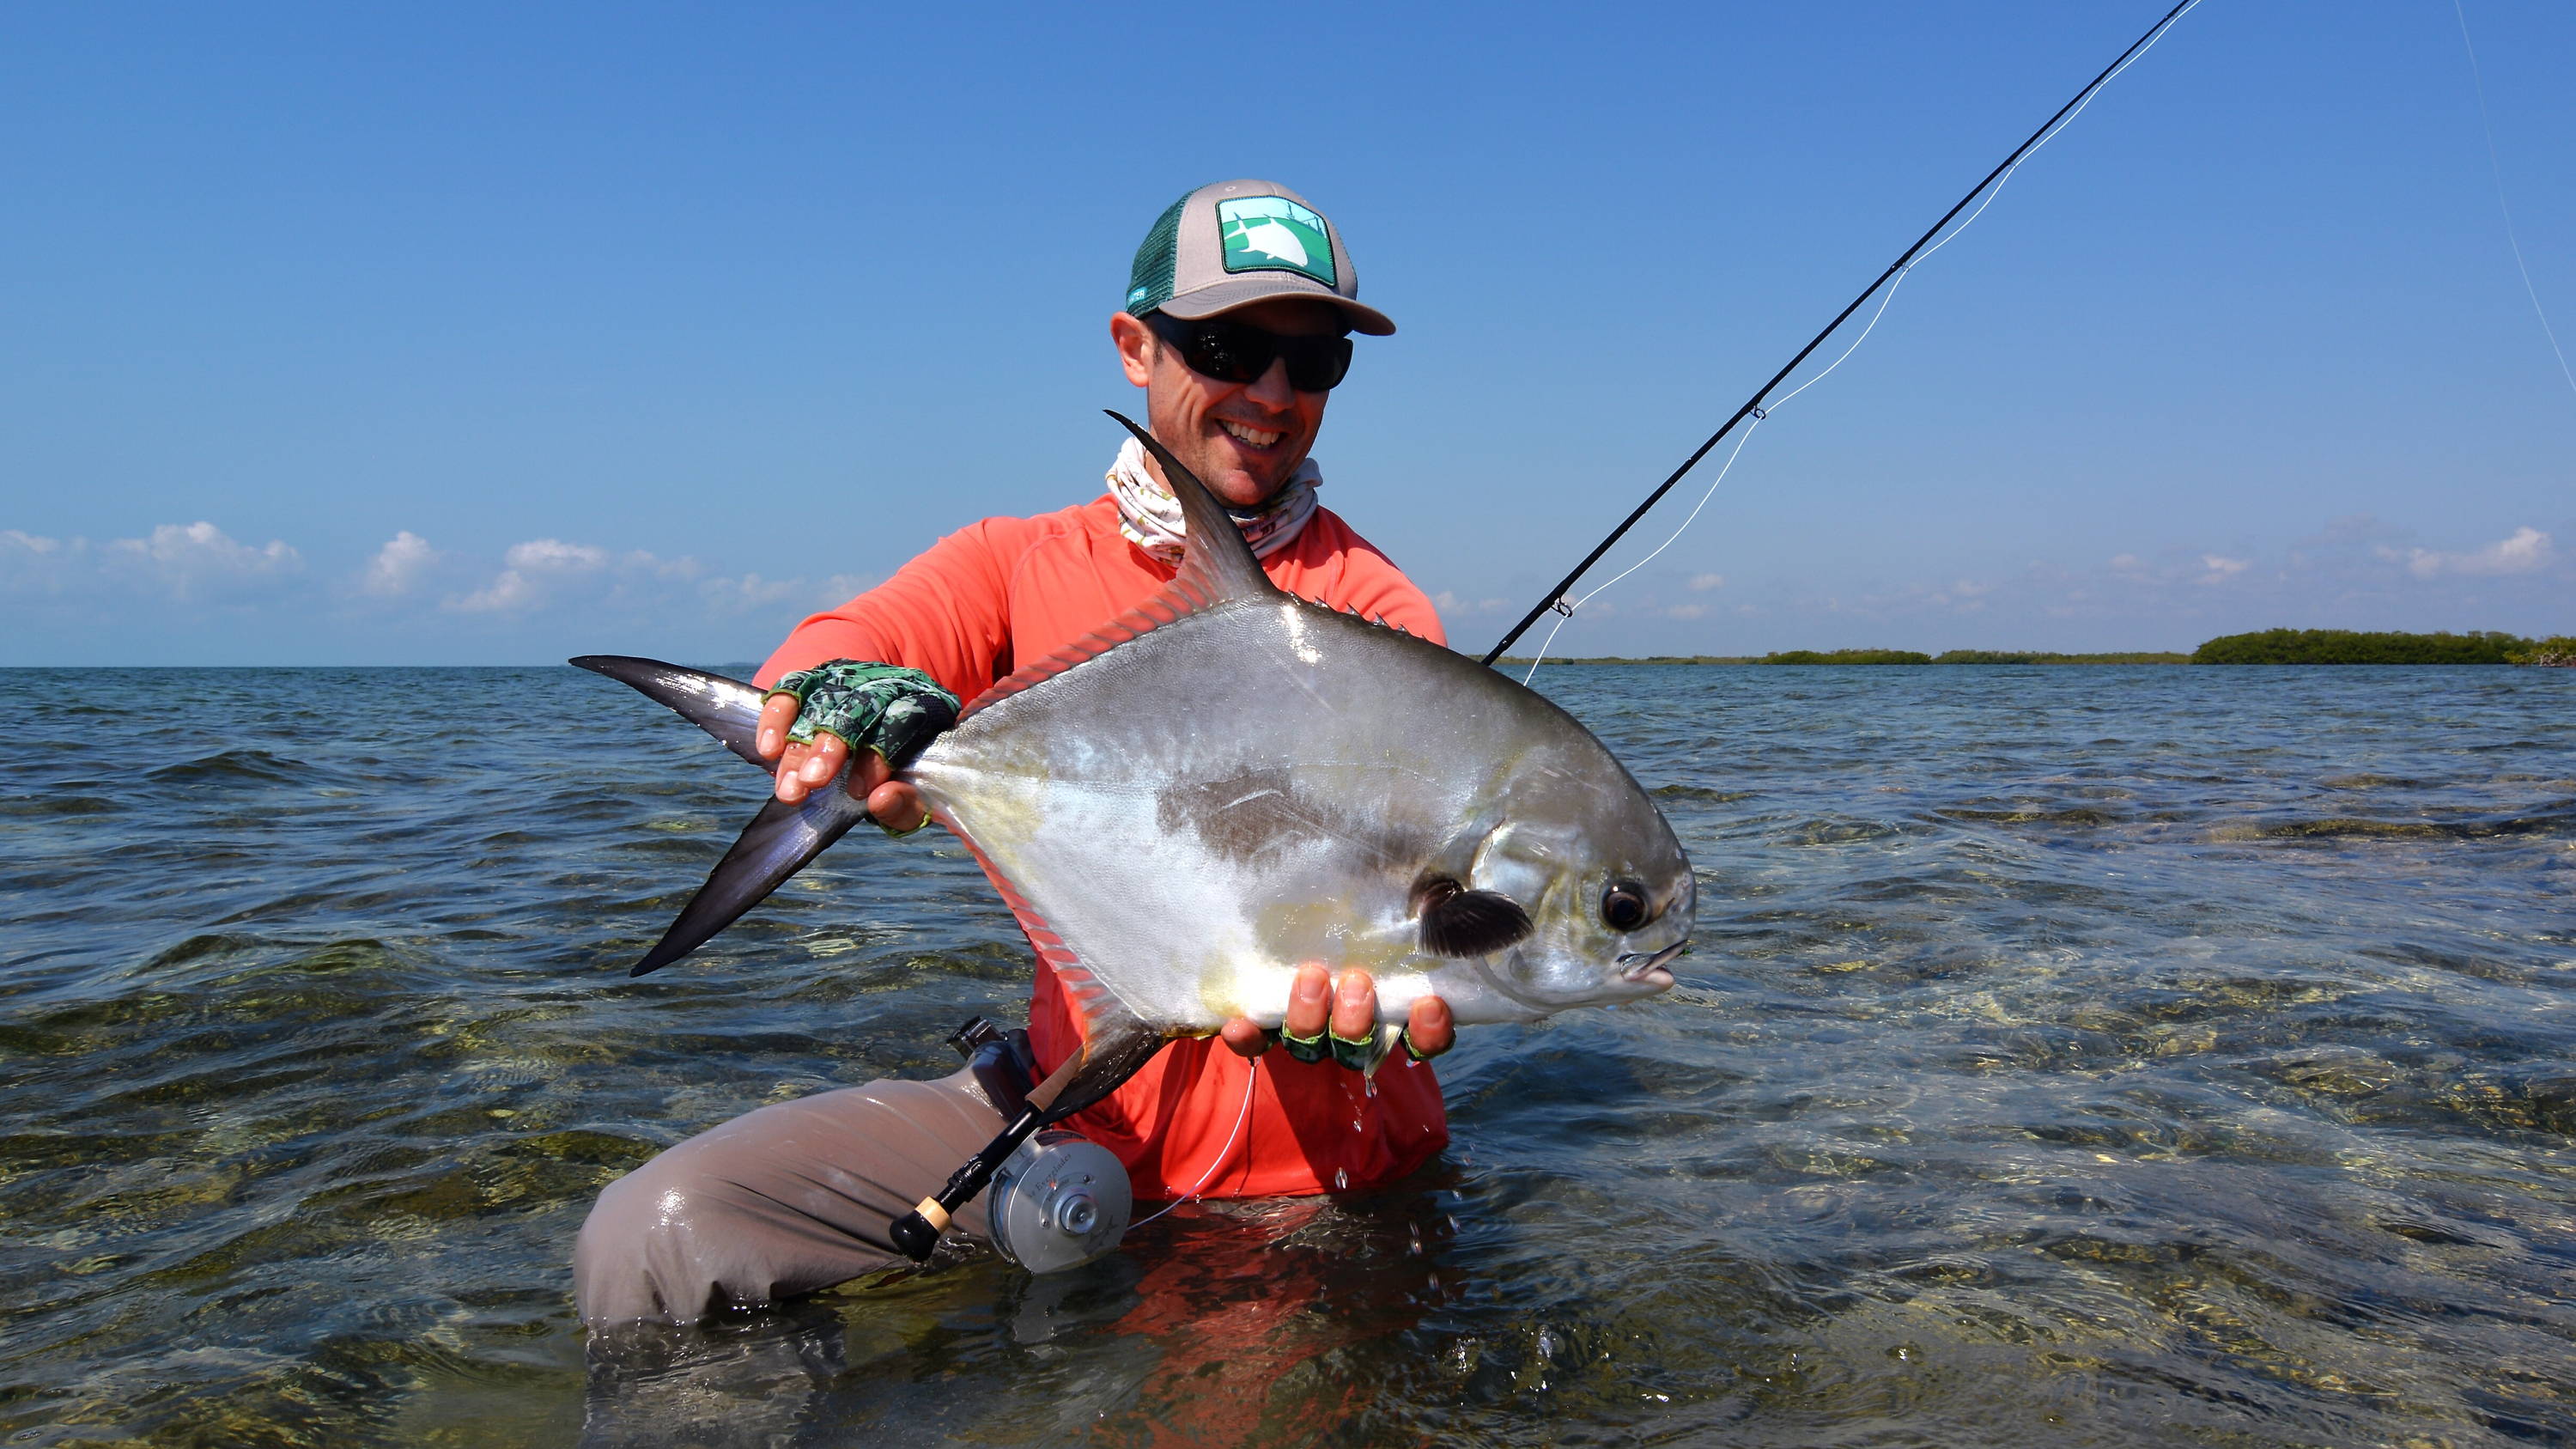 Joe Rotter with a Permit from Cuba Zapata